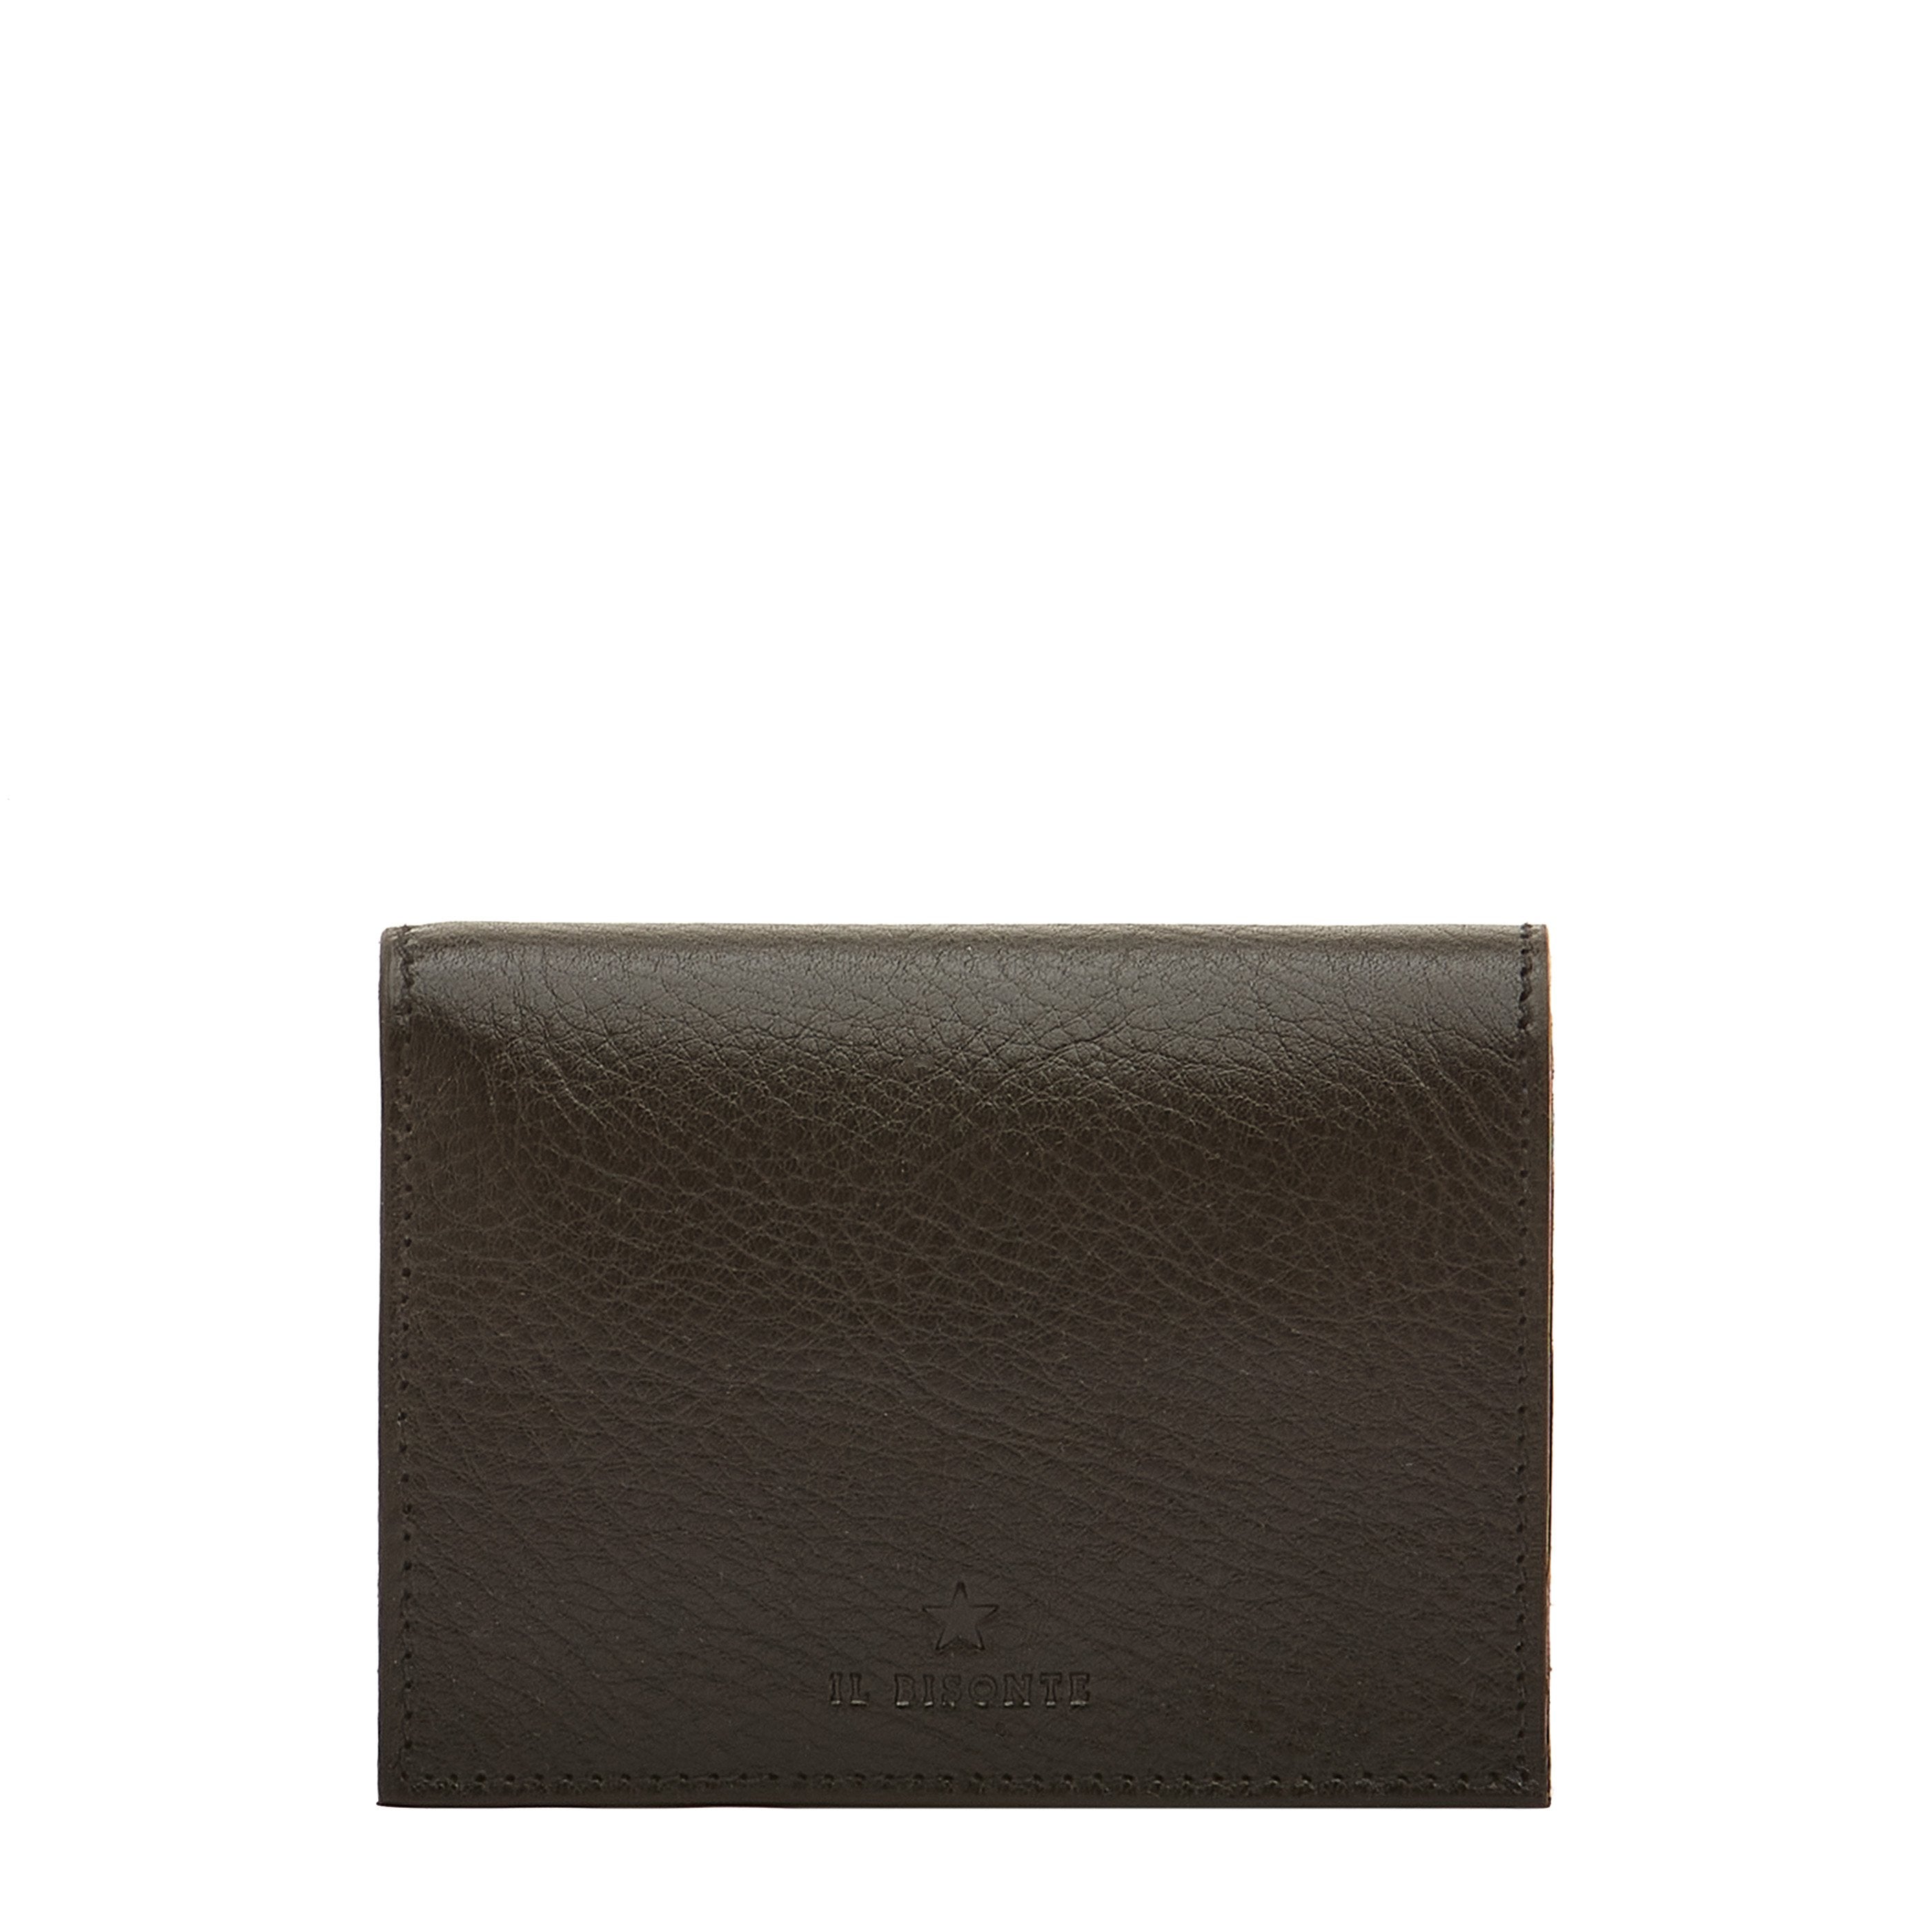 Oliveta  Women's Small Wallet in Leather color Cherry – Il Bisonte